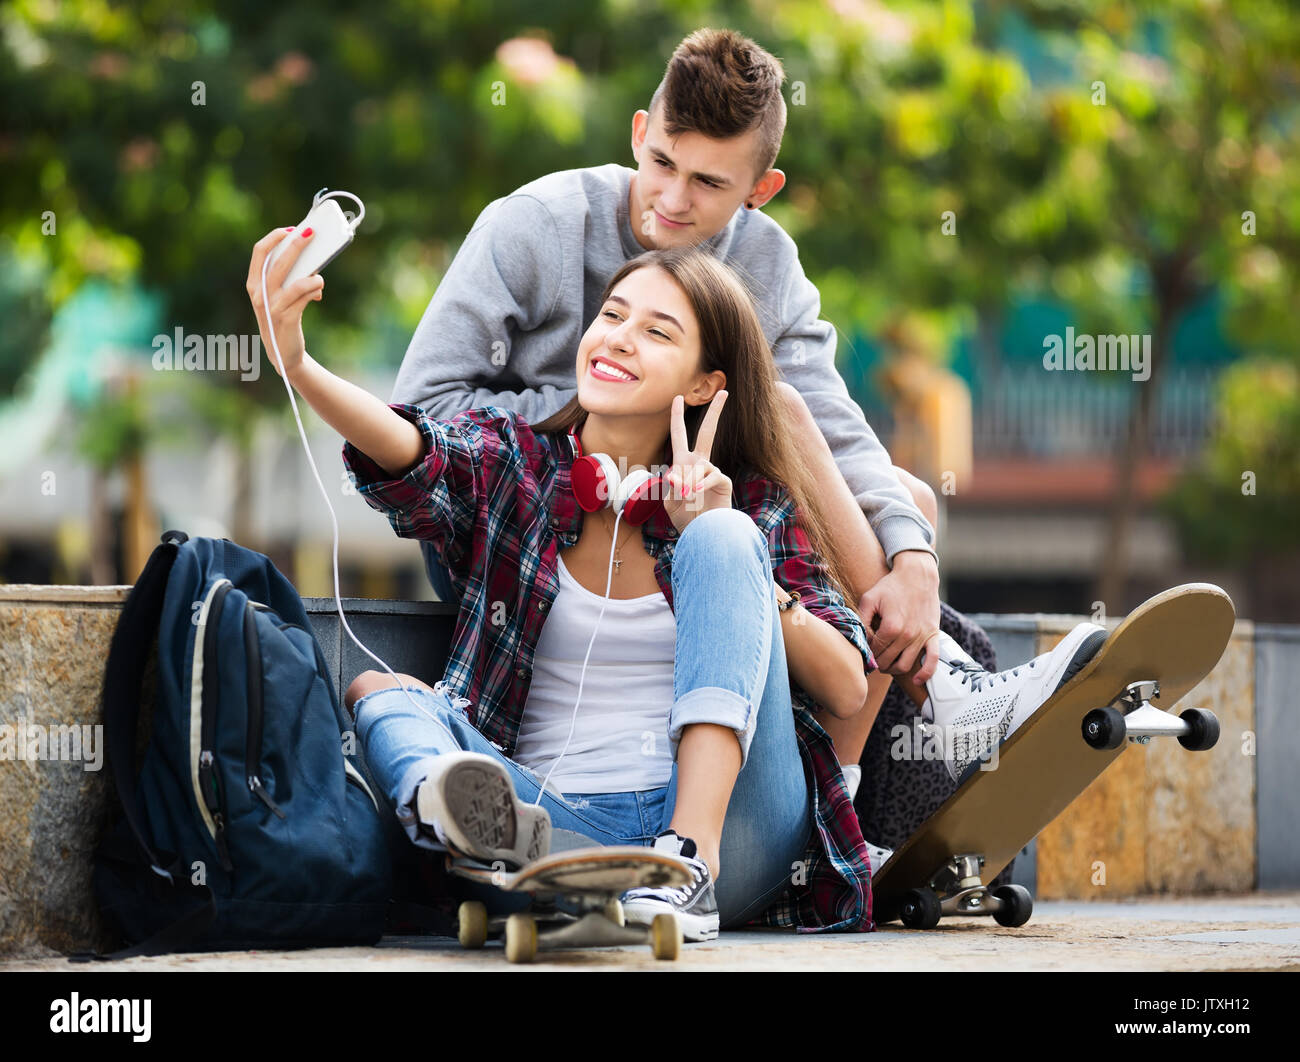 Photography Poses For Teens